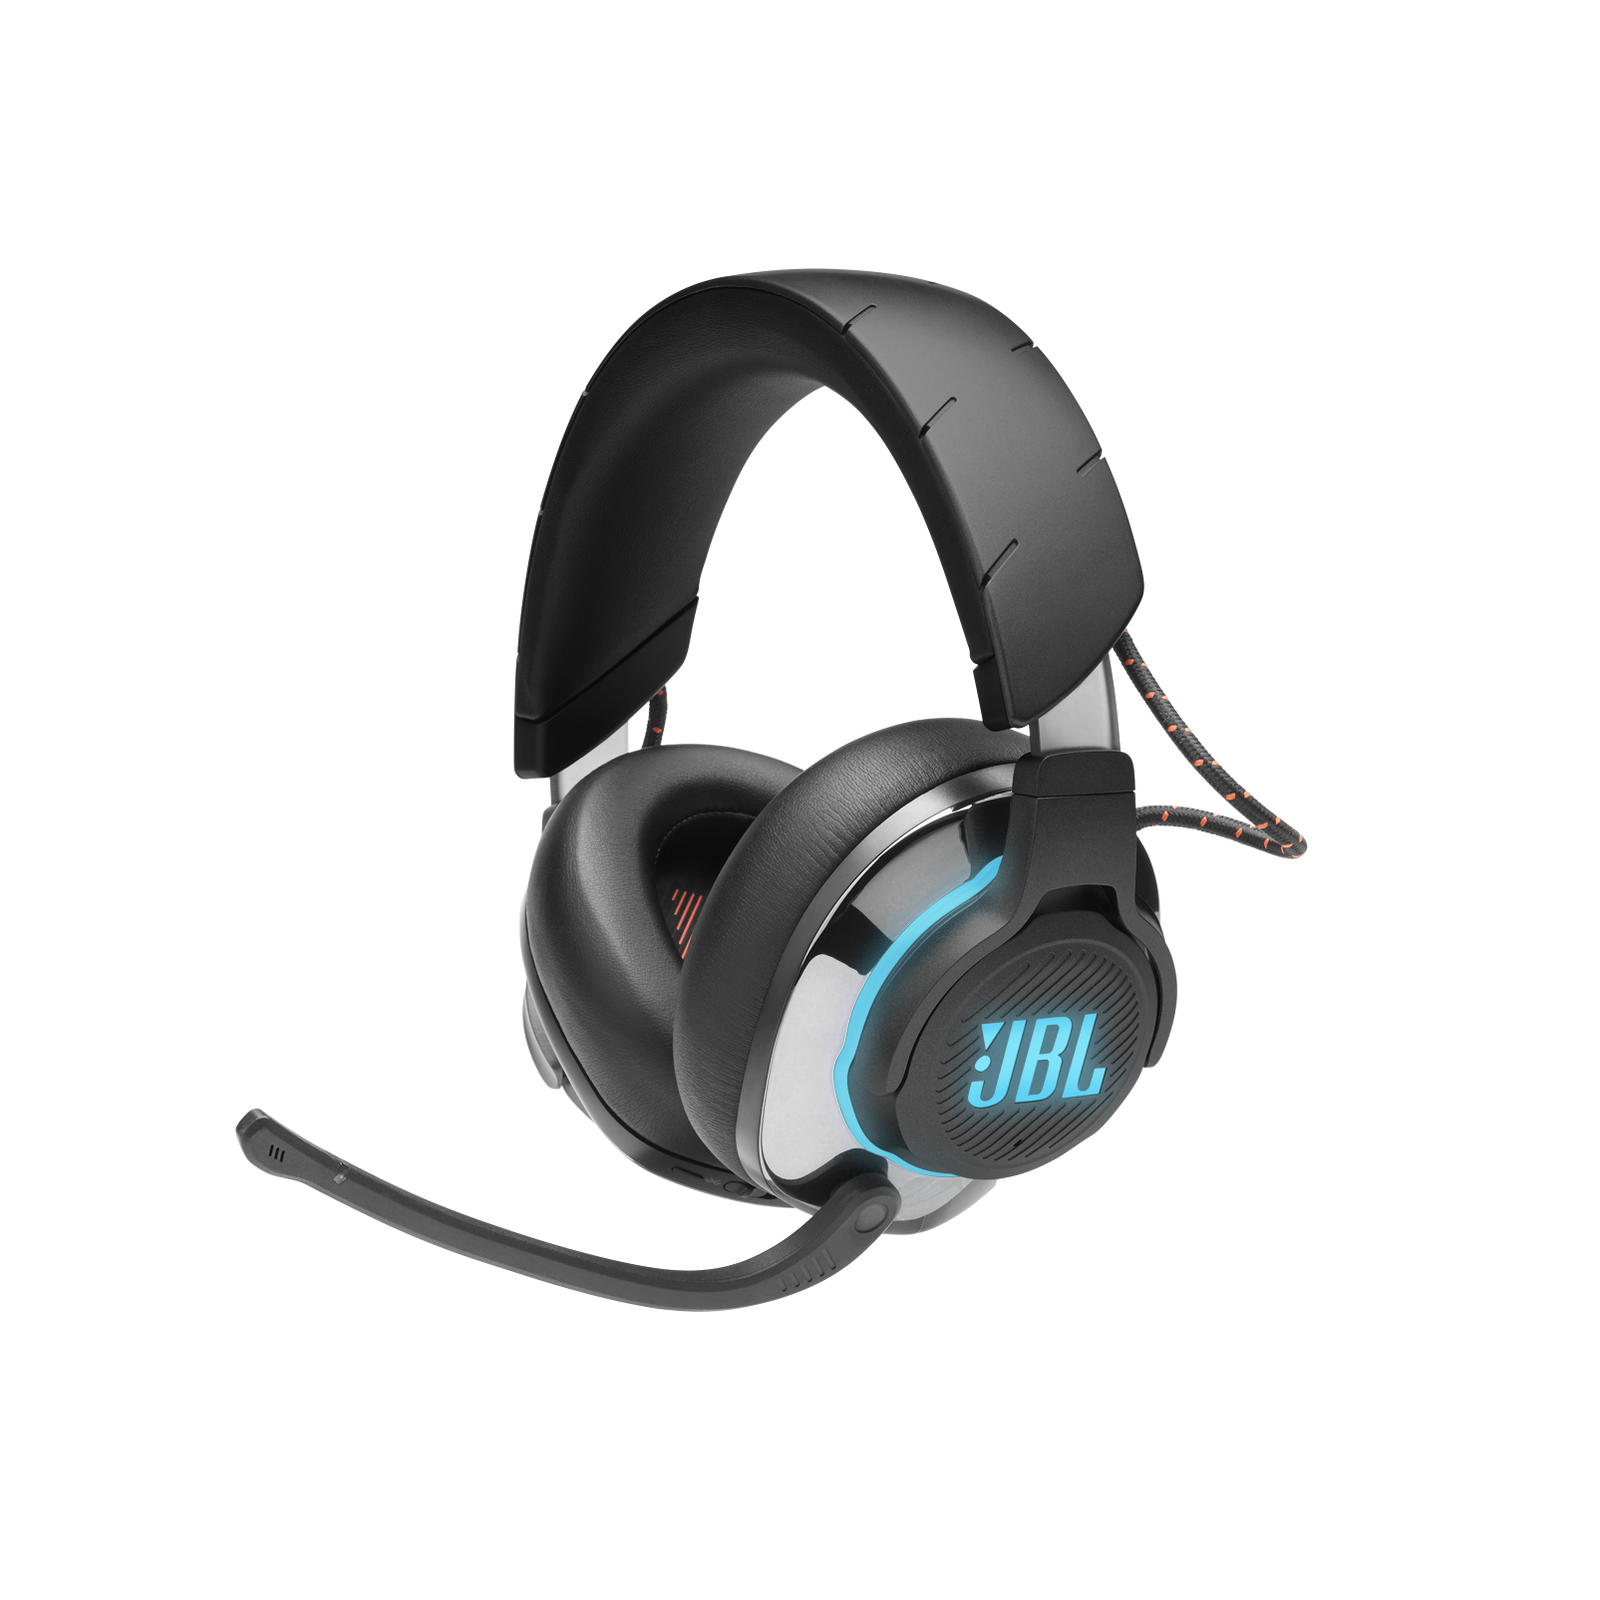 JBL Quantum 810 Black | Over-Ear BT Wireless Gaming Headset - JBL 9.1 Surround Sound & Active Noise-Cancellation - PS5/XBOX One/Switch/PC Compatible Gaming Headset